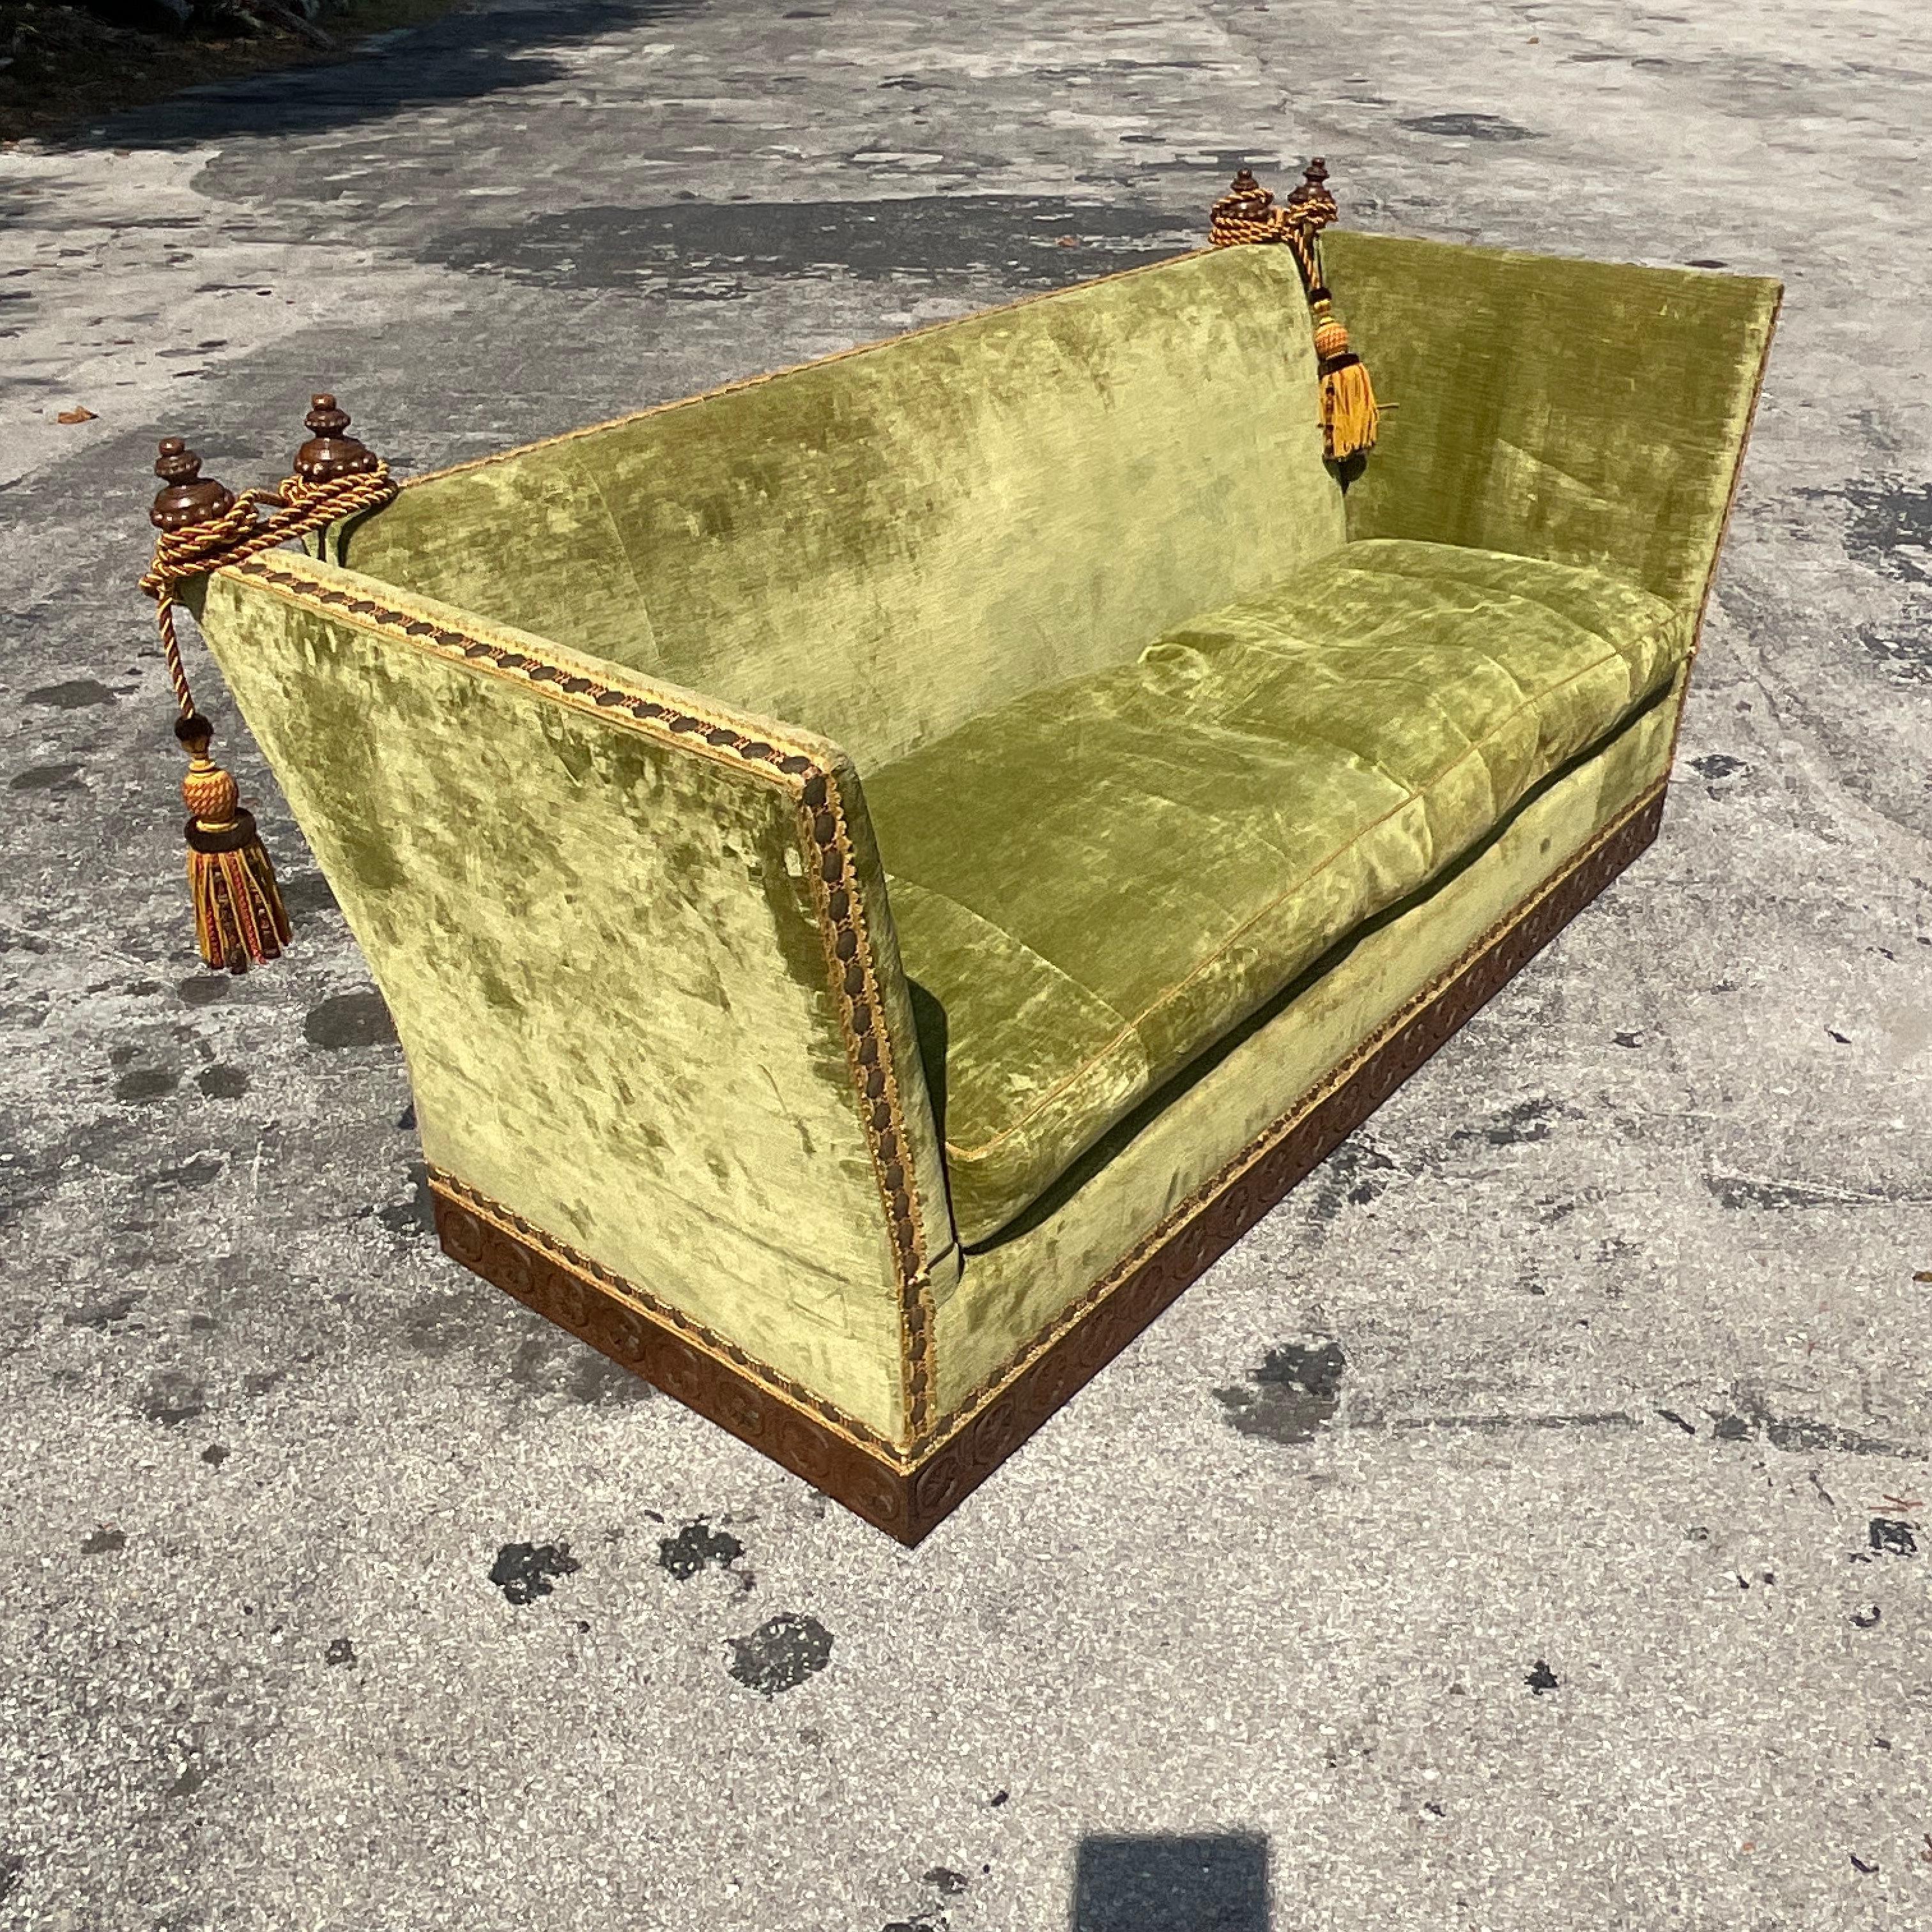 A spectacular vintage Regency Knole sofa. Made by the LA company Cache. Chic drop arm design in a brilliant chartreuse green. Heavy nailhead trim and giant tassels. Acquired from a Palm Beach estate.